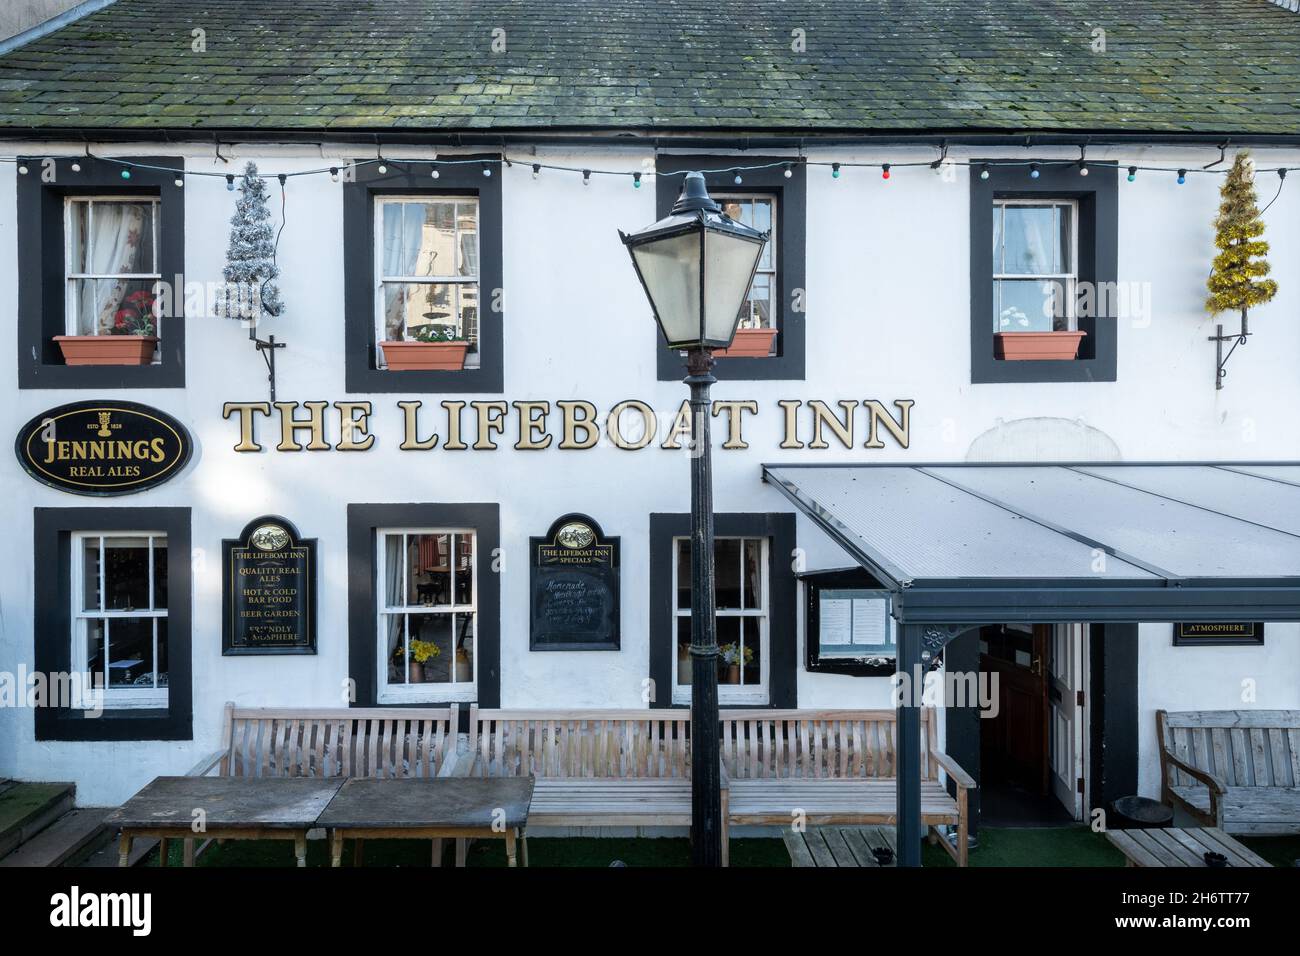 The Lifeboat Inn in the town of Maryport, Cumbria, England, UK Stock Photo